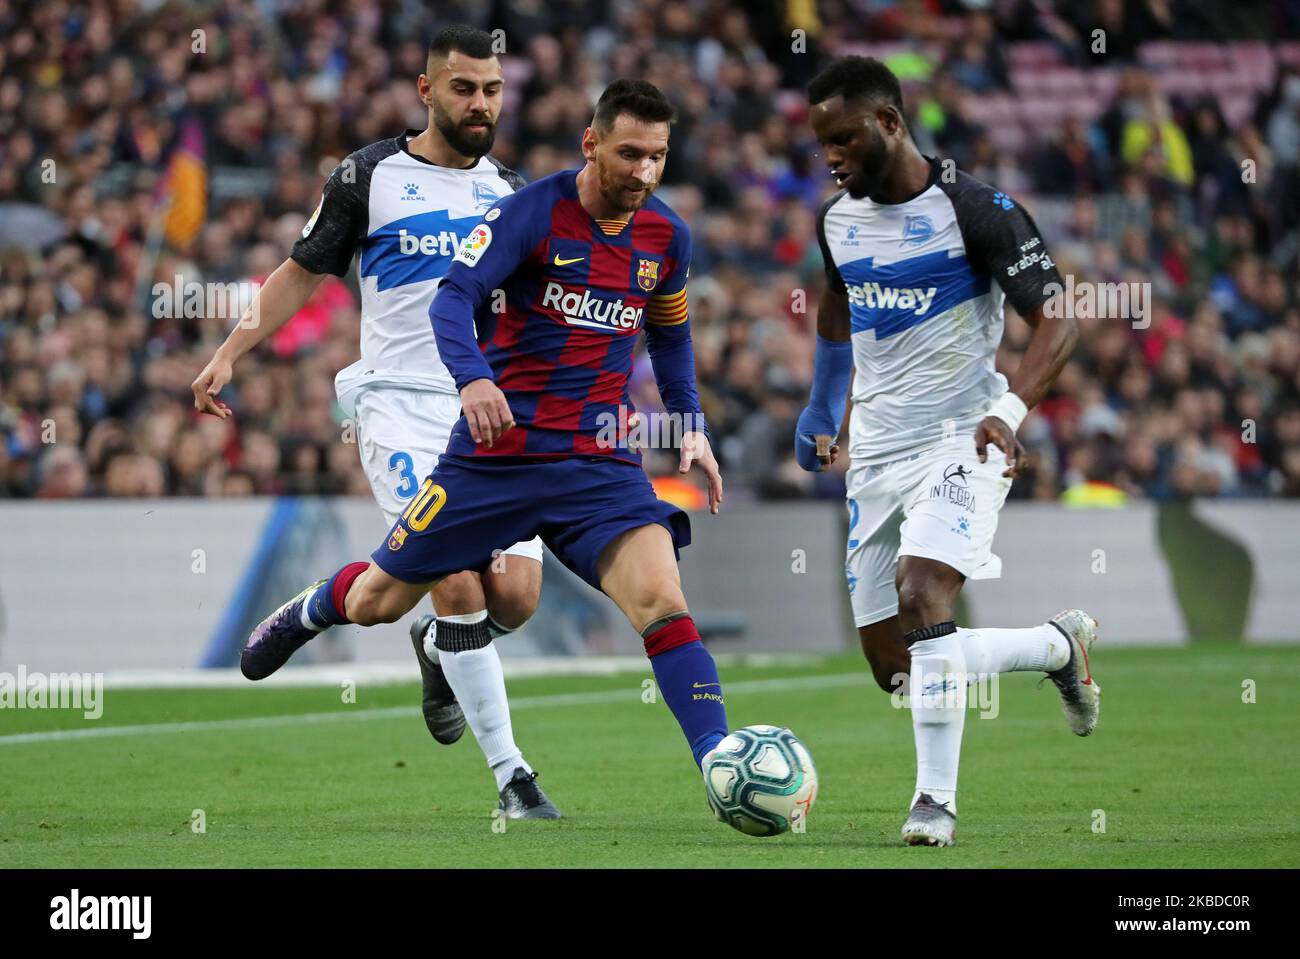 Mubarak Wakaso, Ruben Duarte and Leo Messi during the match between FC Barcelona and Deportivo Alaves, corresponding to the week 18 of the Liga Santander, played at the Camp Nou Stadium, on 21th December 2019, in Barcelona, Spain. -- (Photo by Urbanandsport/NurPhoto) Stock Photo